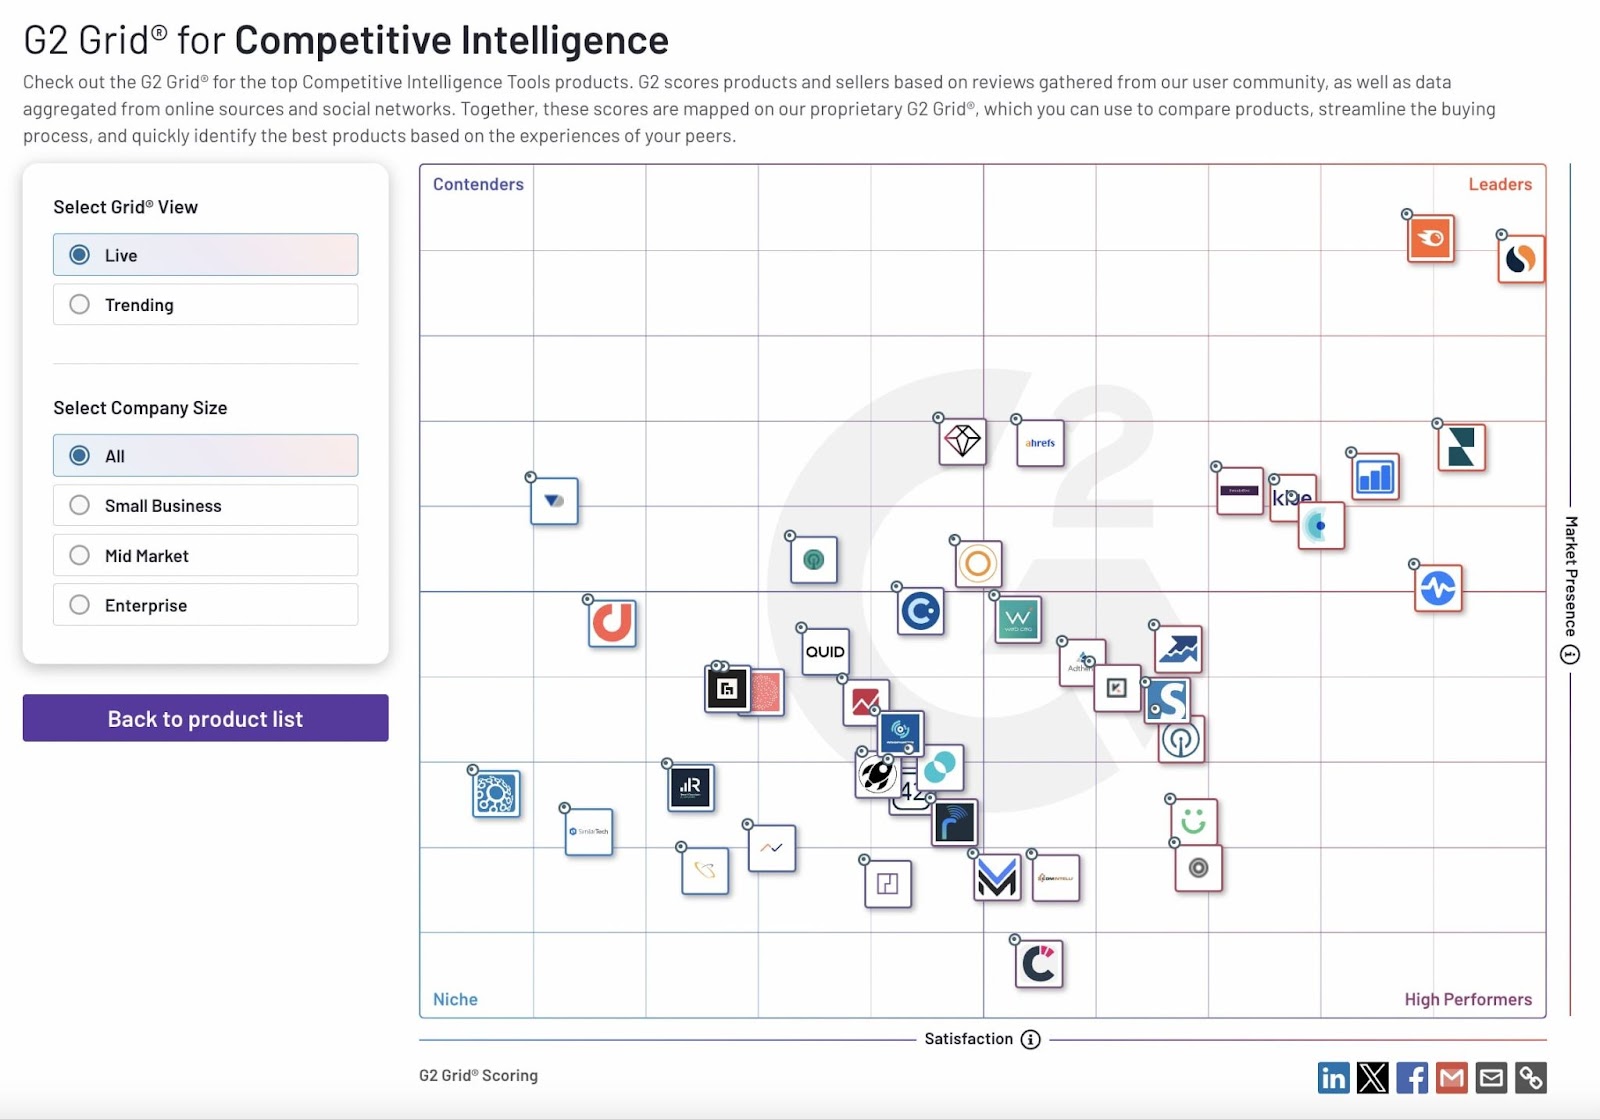 G2 Grid for competitive intelligence tools